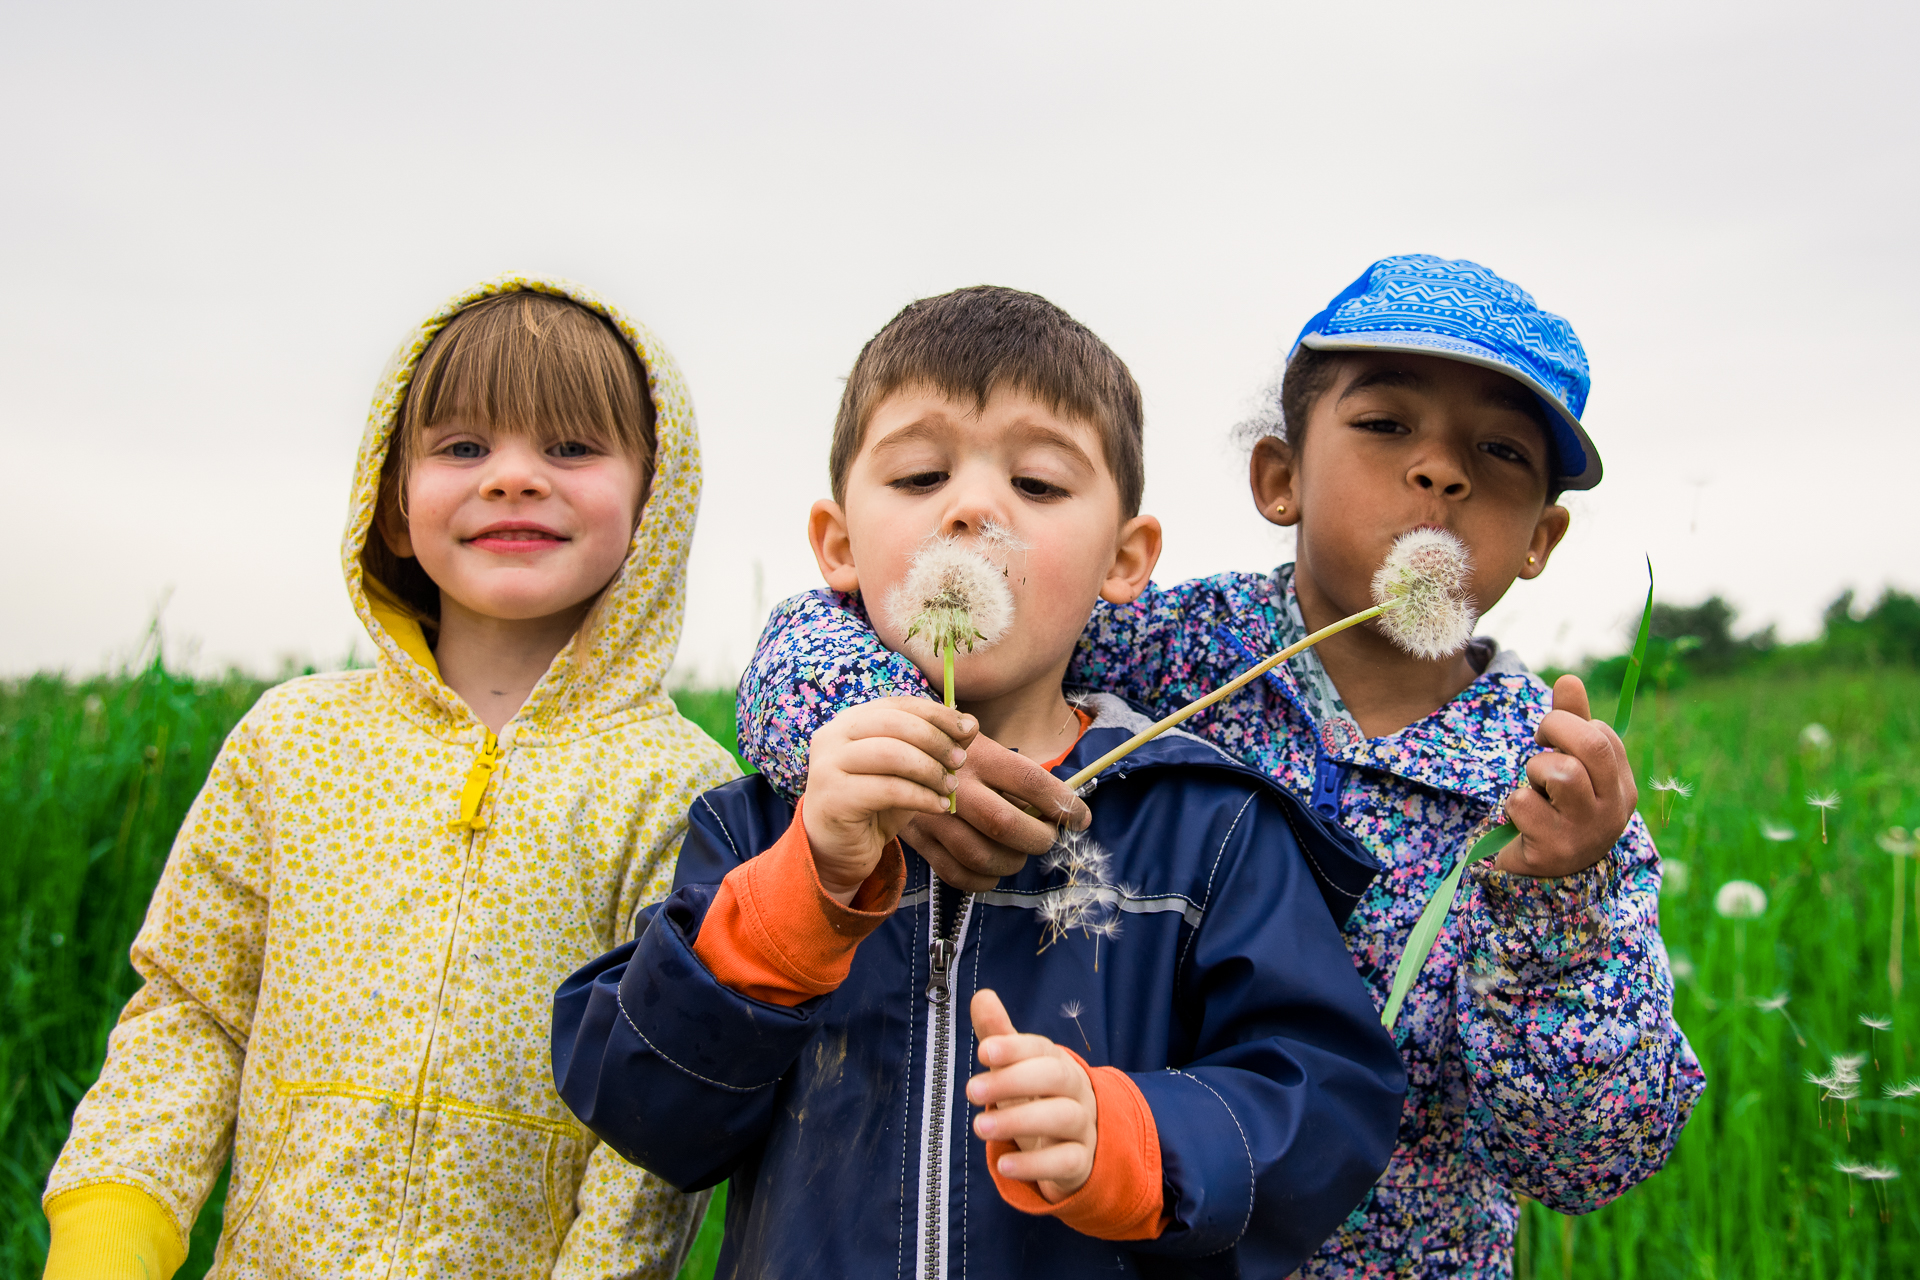 Three children at Drumlin Farm Community Preschool blowing seeds from dandelion flowers with their arms around each other